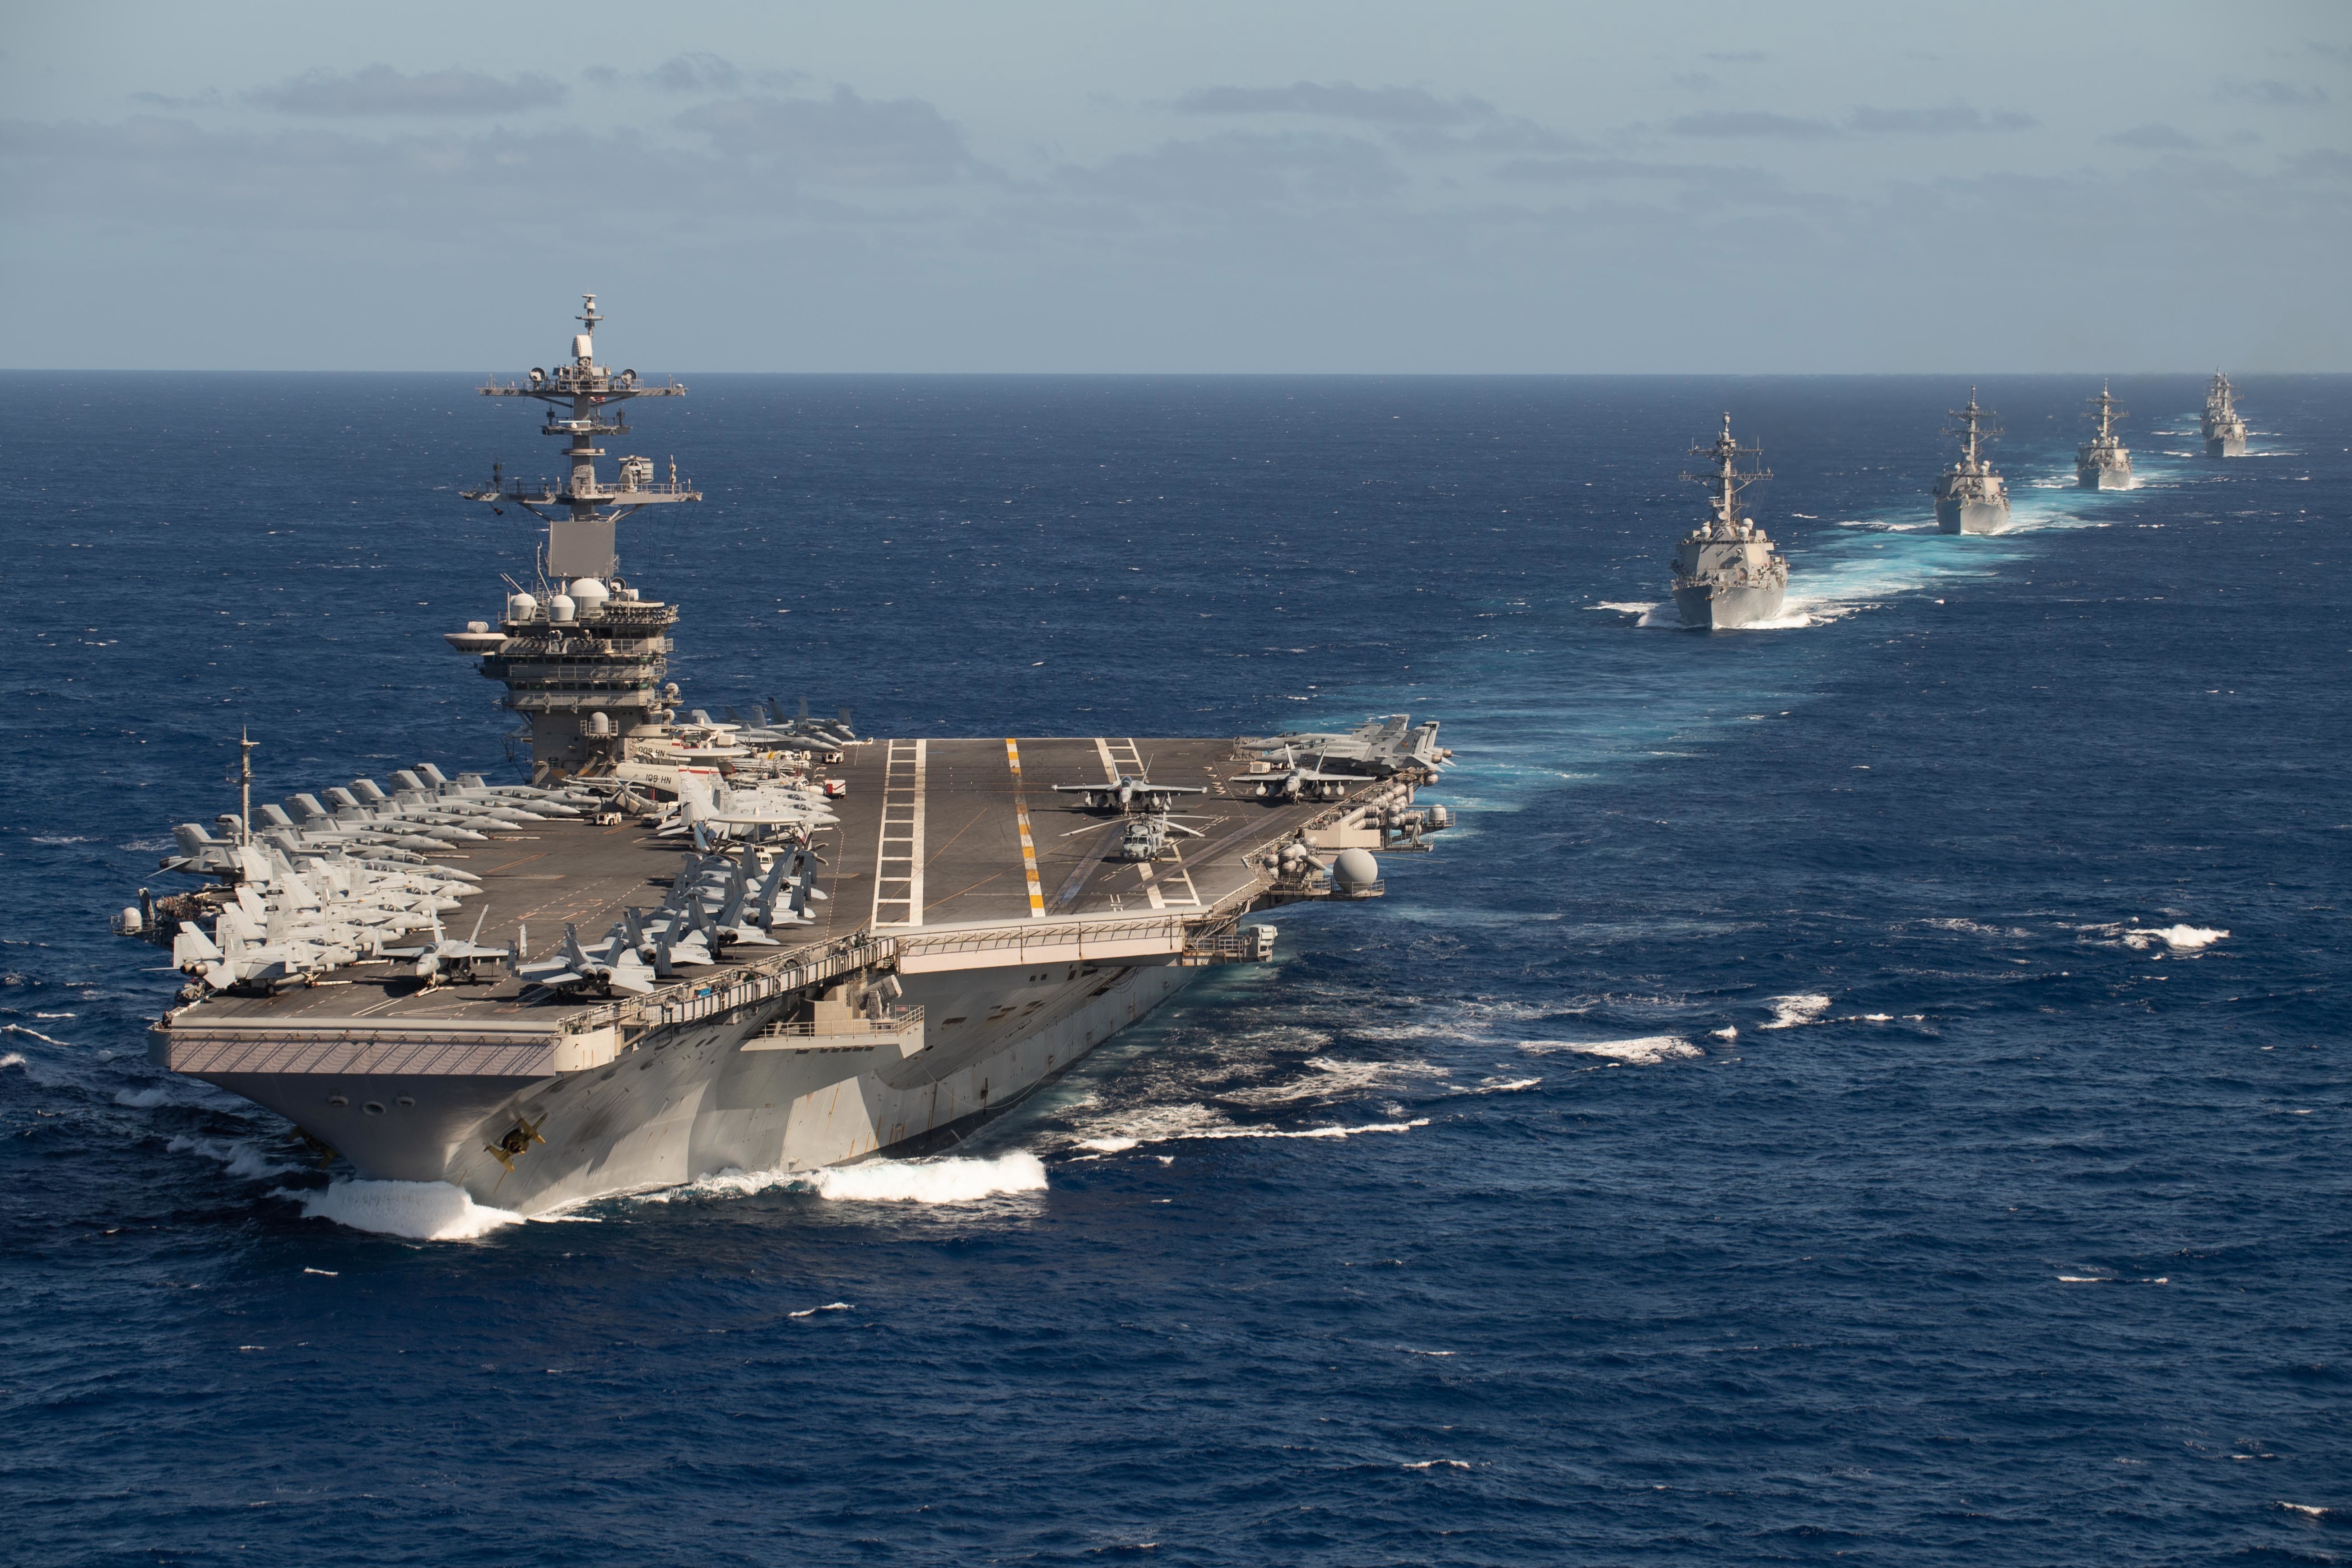 military, uss theodore roosevelt (cvn 71), aircraft carrier, warship, warships